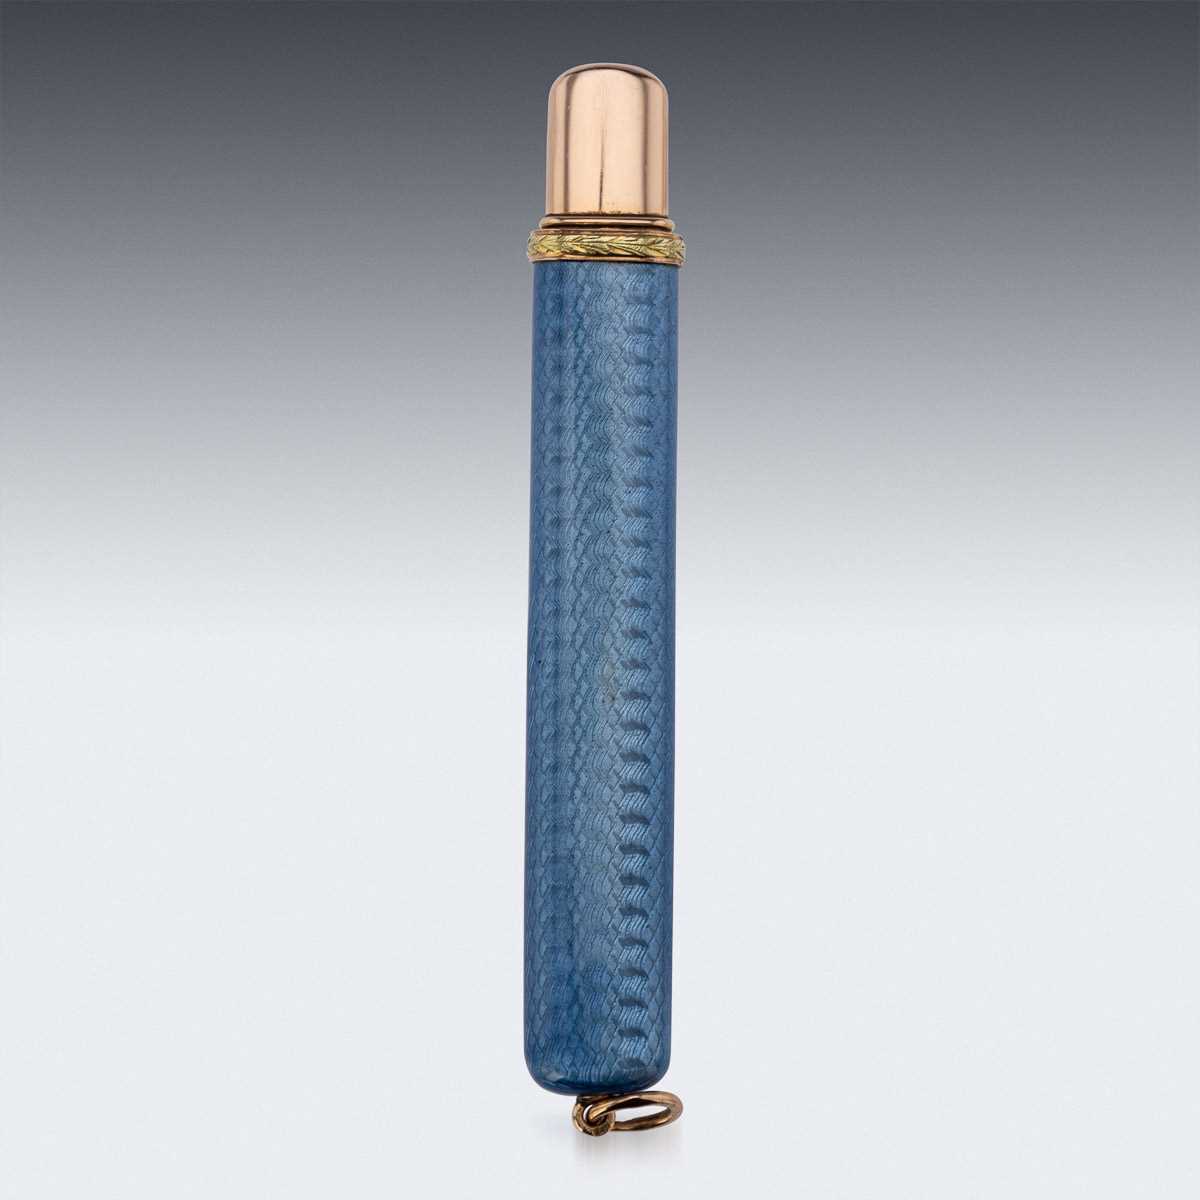 FABERGE: AN EARLY 20TH CENTURY GOLD AND ENAMEL PENCIL, MAKER'S MARK A.A. - Image 8 of 9